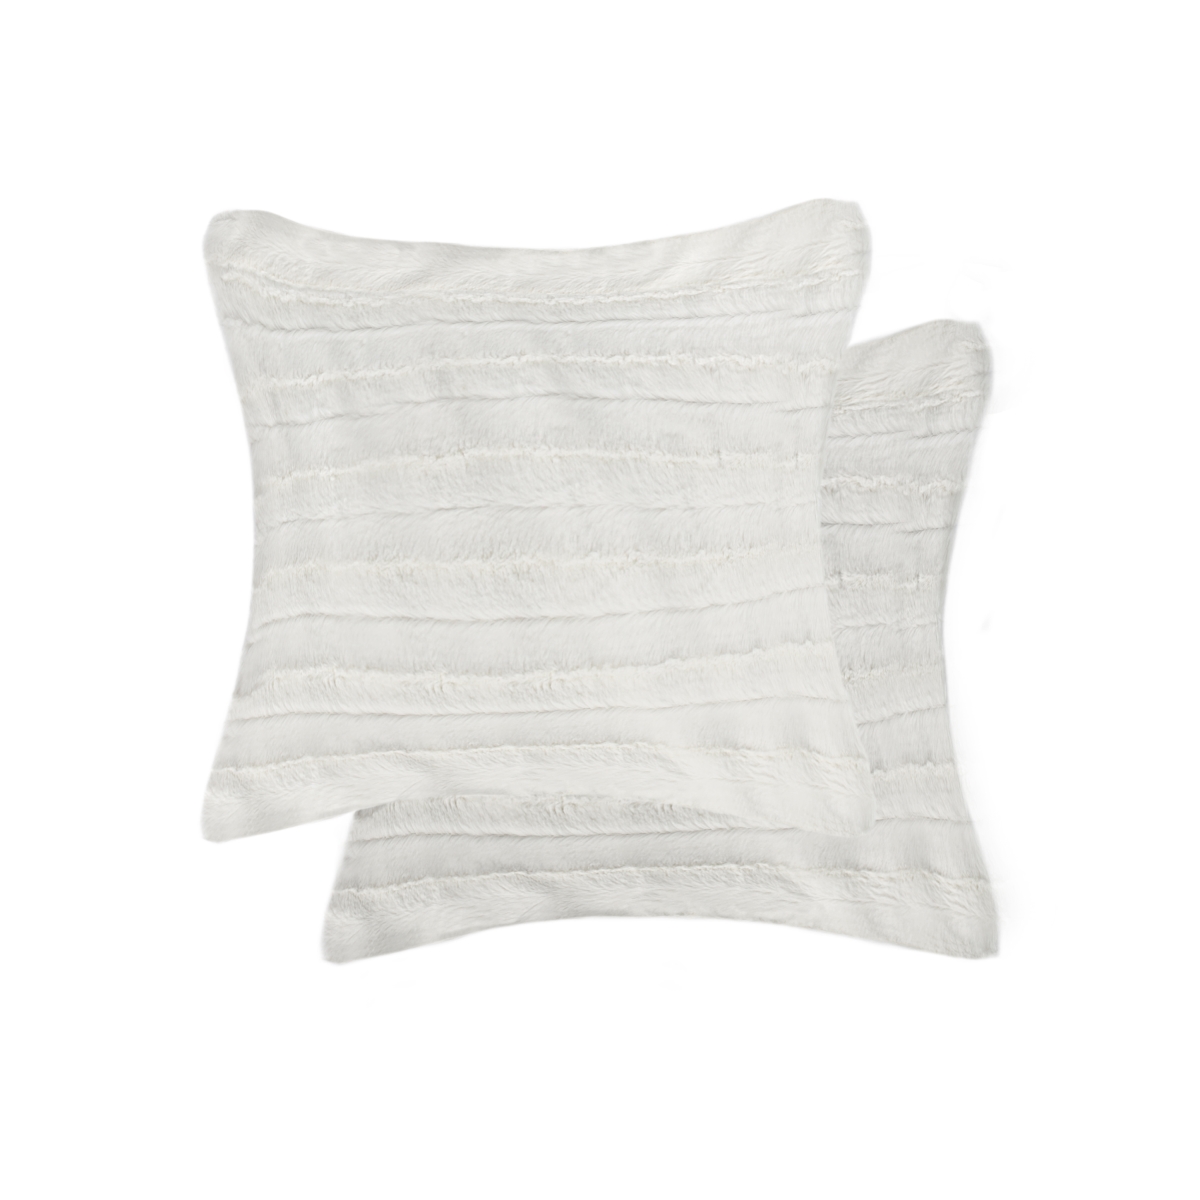 676685048592 18 X 18 In. Belton Linear Pillow - Off White - Pack Of 2